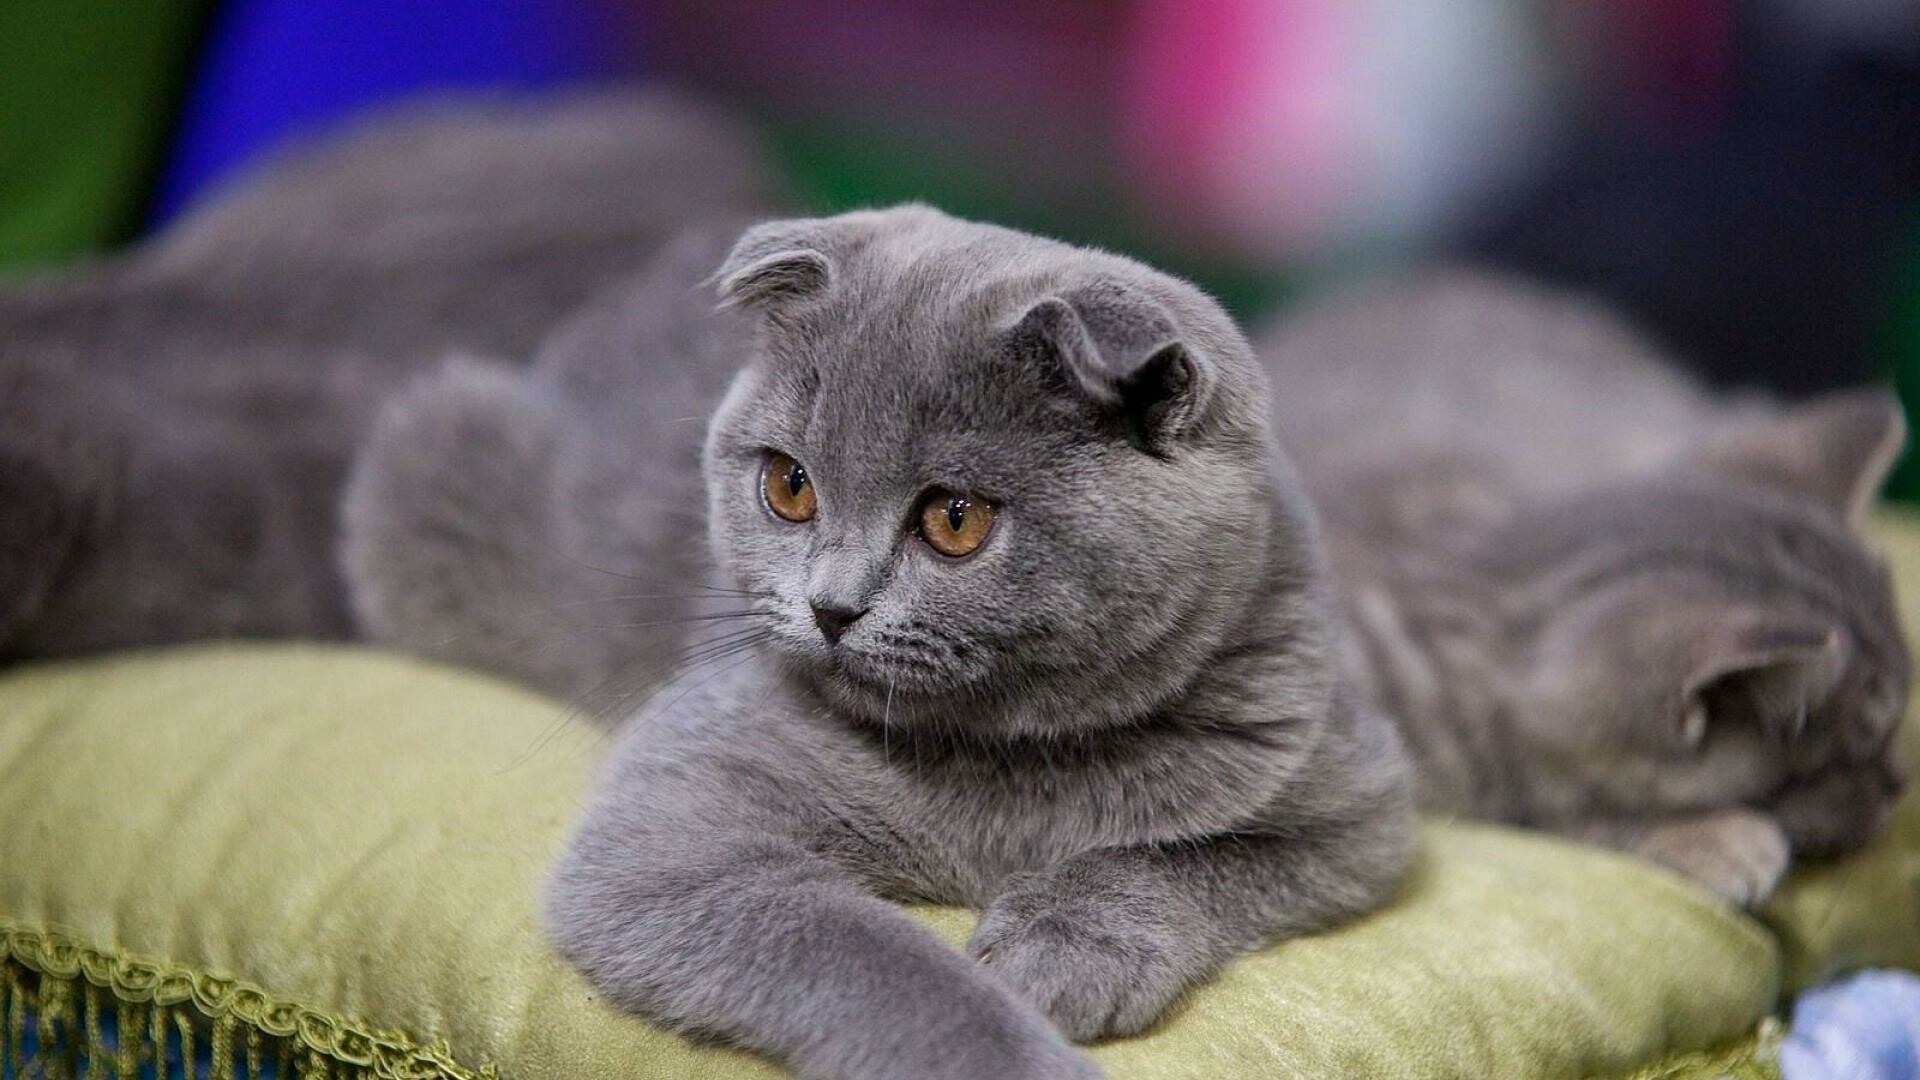 Scottish Fold: Medium-sized cats that are more likely to have short, dense hair than long, and their coats come in a variety of colors and patterns. 1920x1080 Full HD Background.